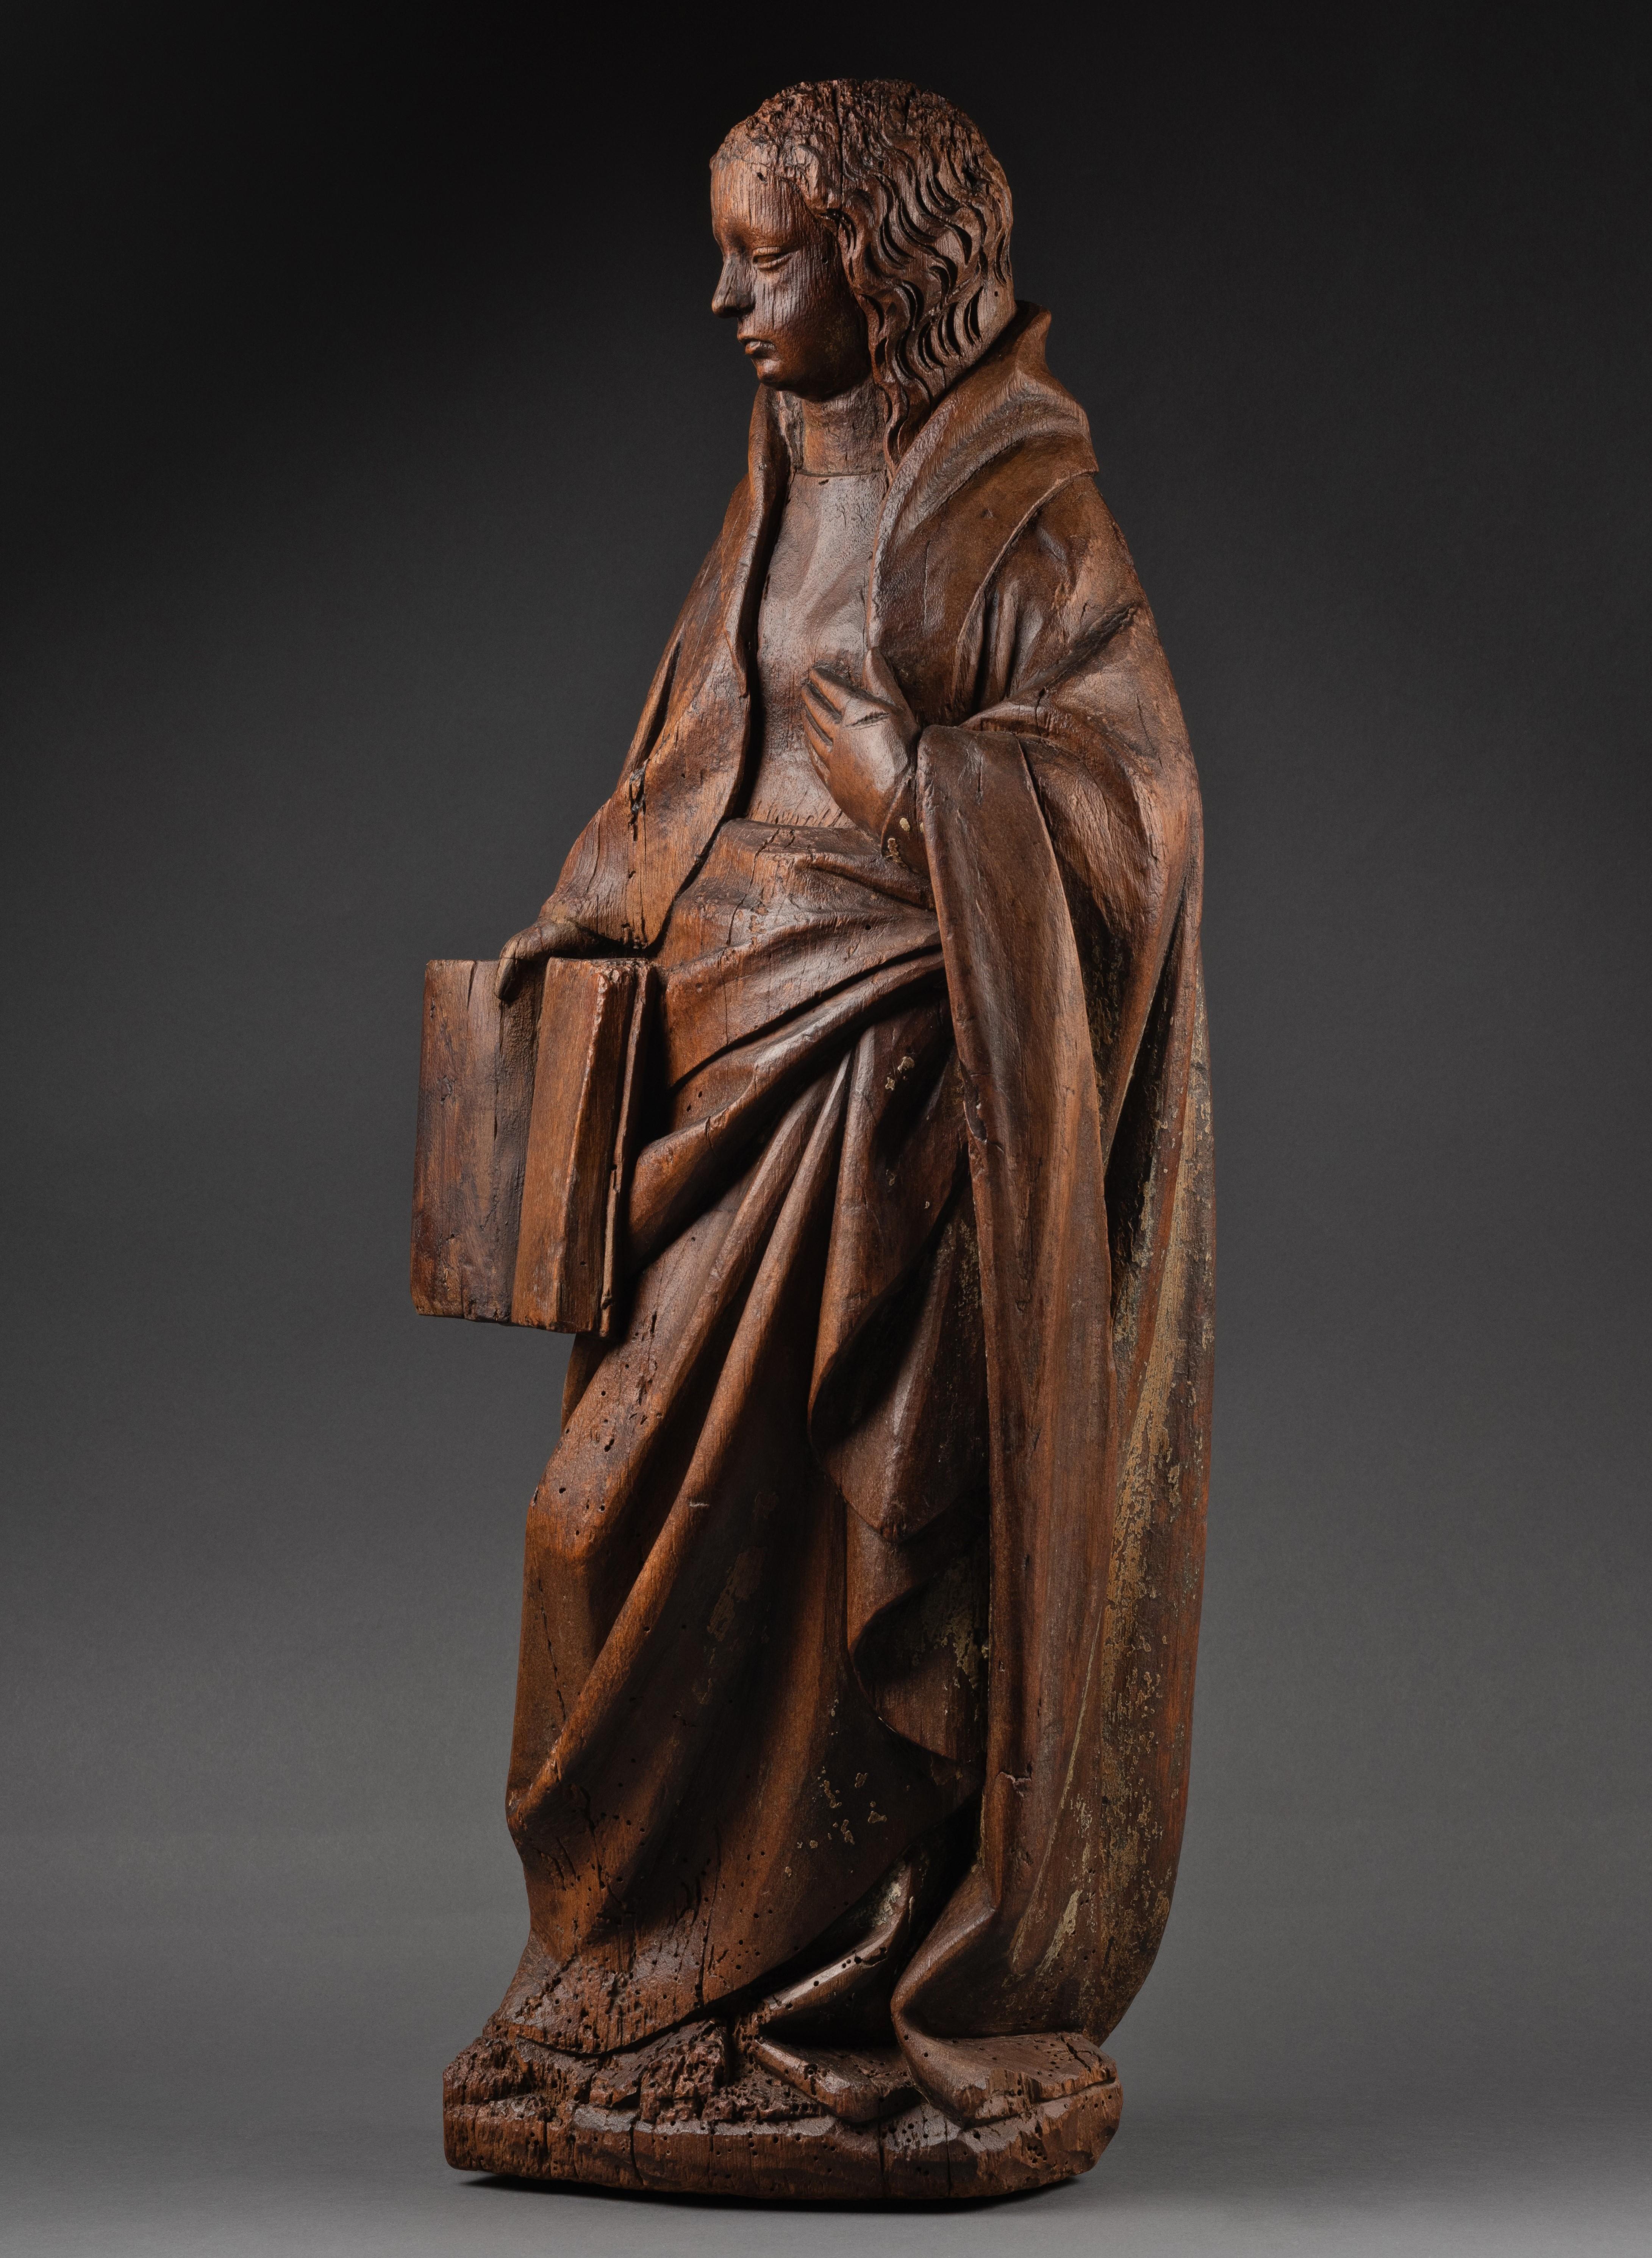 Virgin of the Annunciation, Burgundy, early 15th century - Brown Figurative Sculpture by Claus de Werve